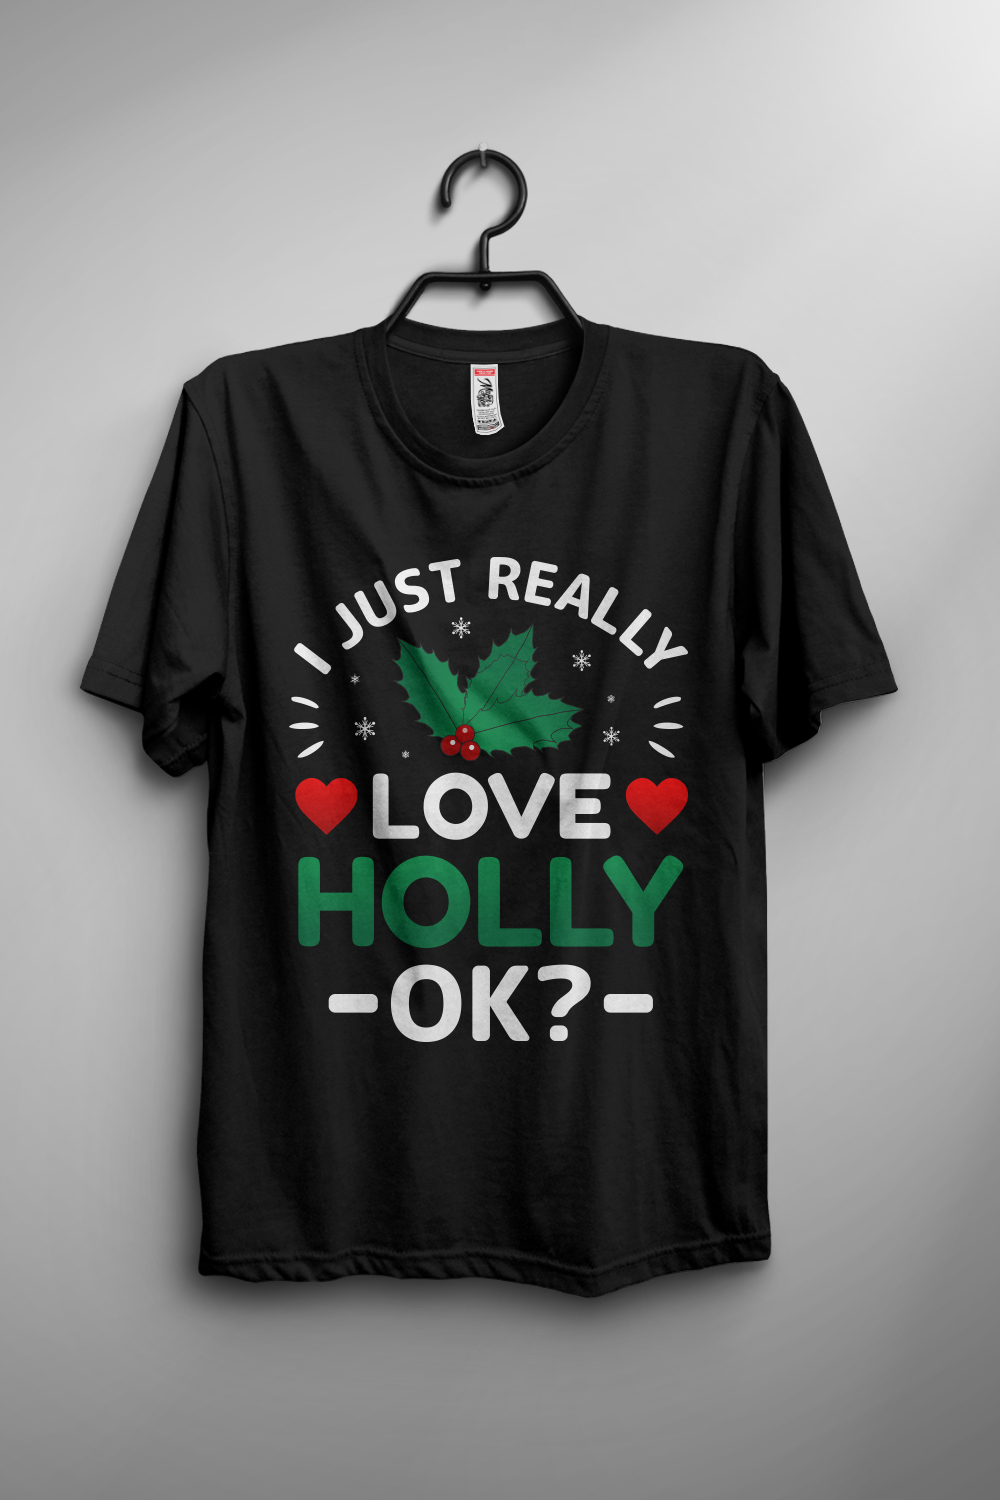 I Just really Love Holly Ok T-shirt design pinterest preview image.